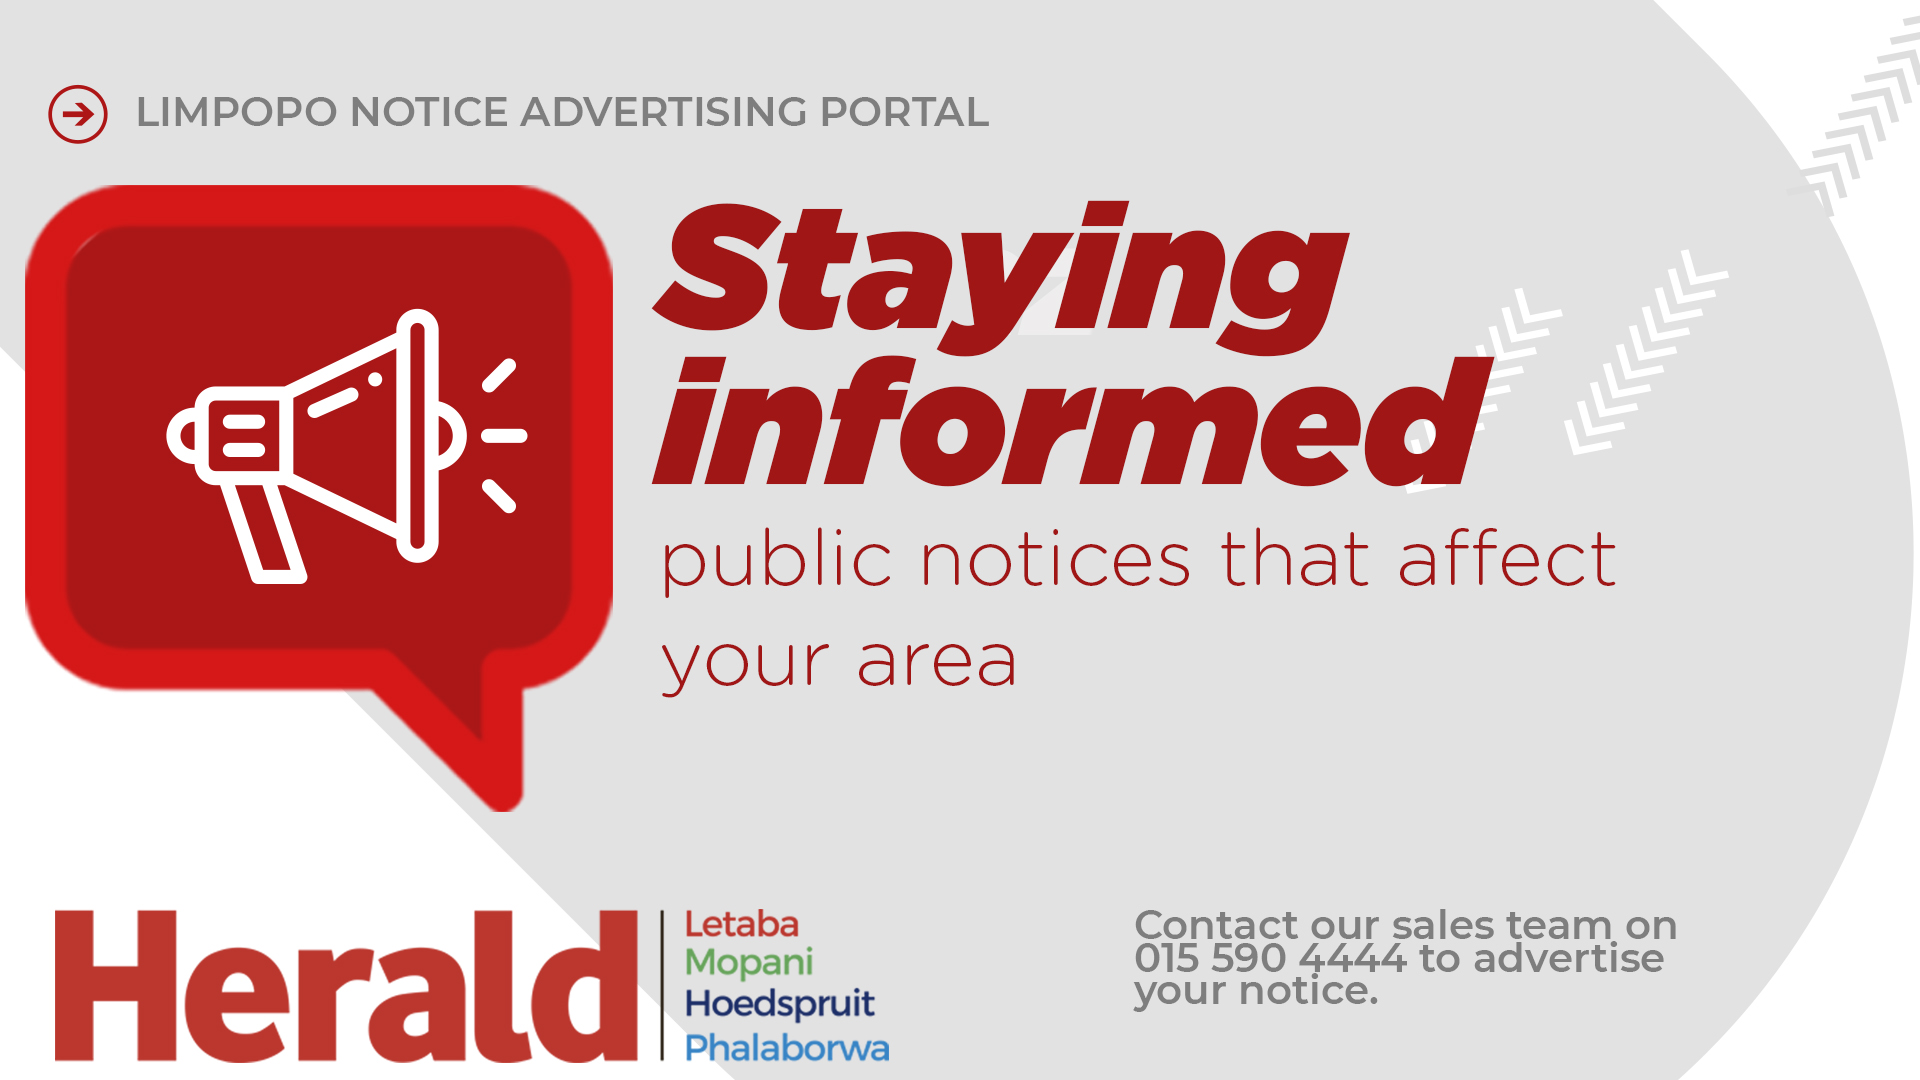 STAY INFORMED with- Limpopo notices